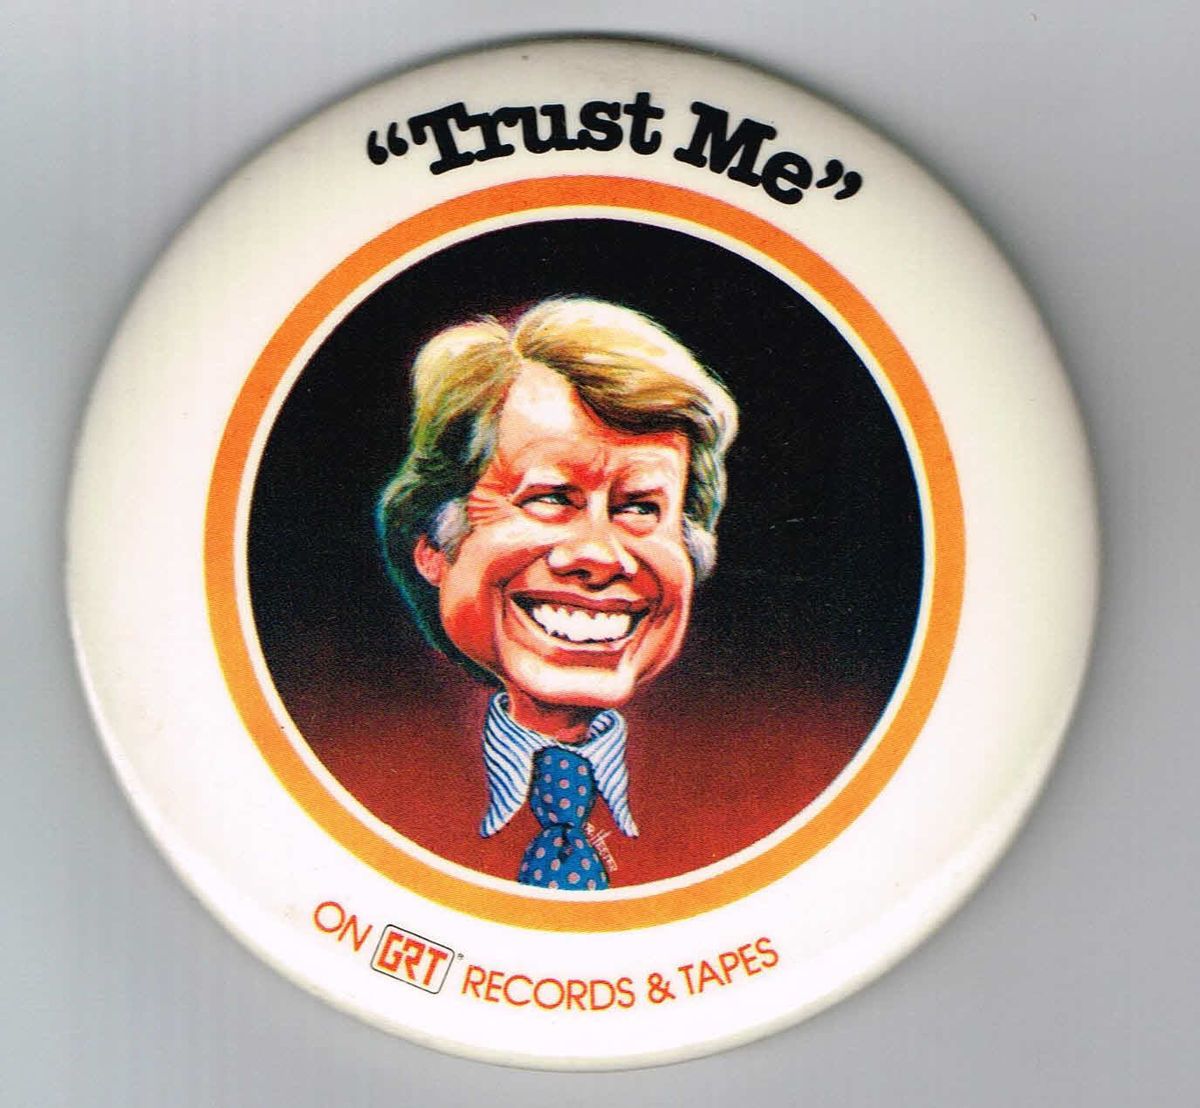 Jimmy Carter Trust Me on GRT Records Tapes Pin Pinback Button B911